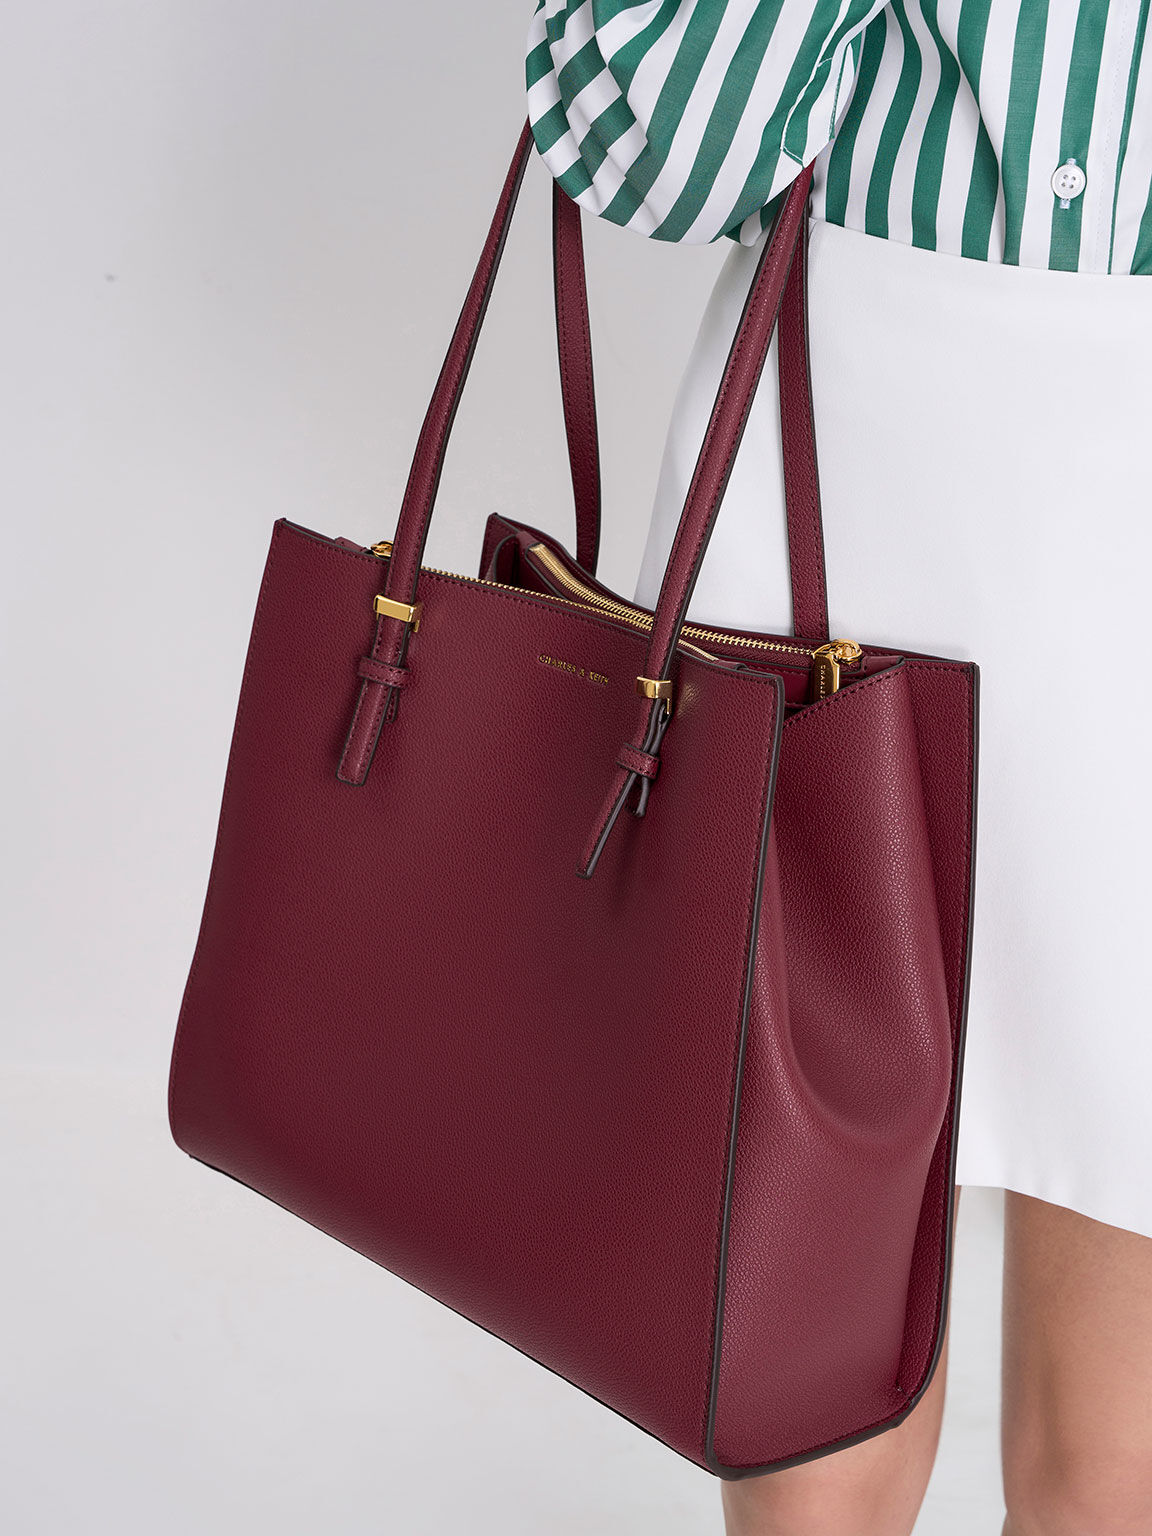 wooum Charles And Keith Bag ( color - Maroon)